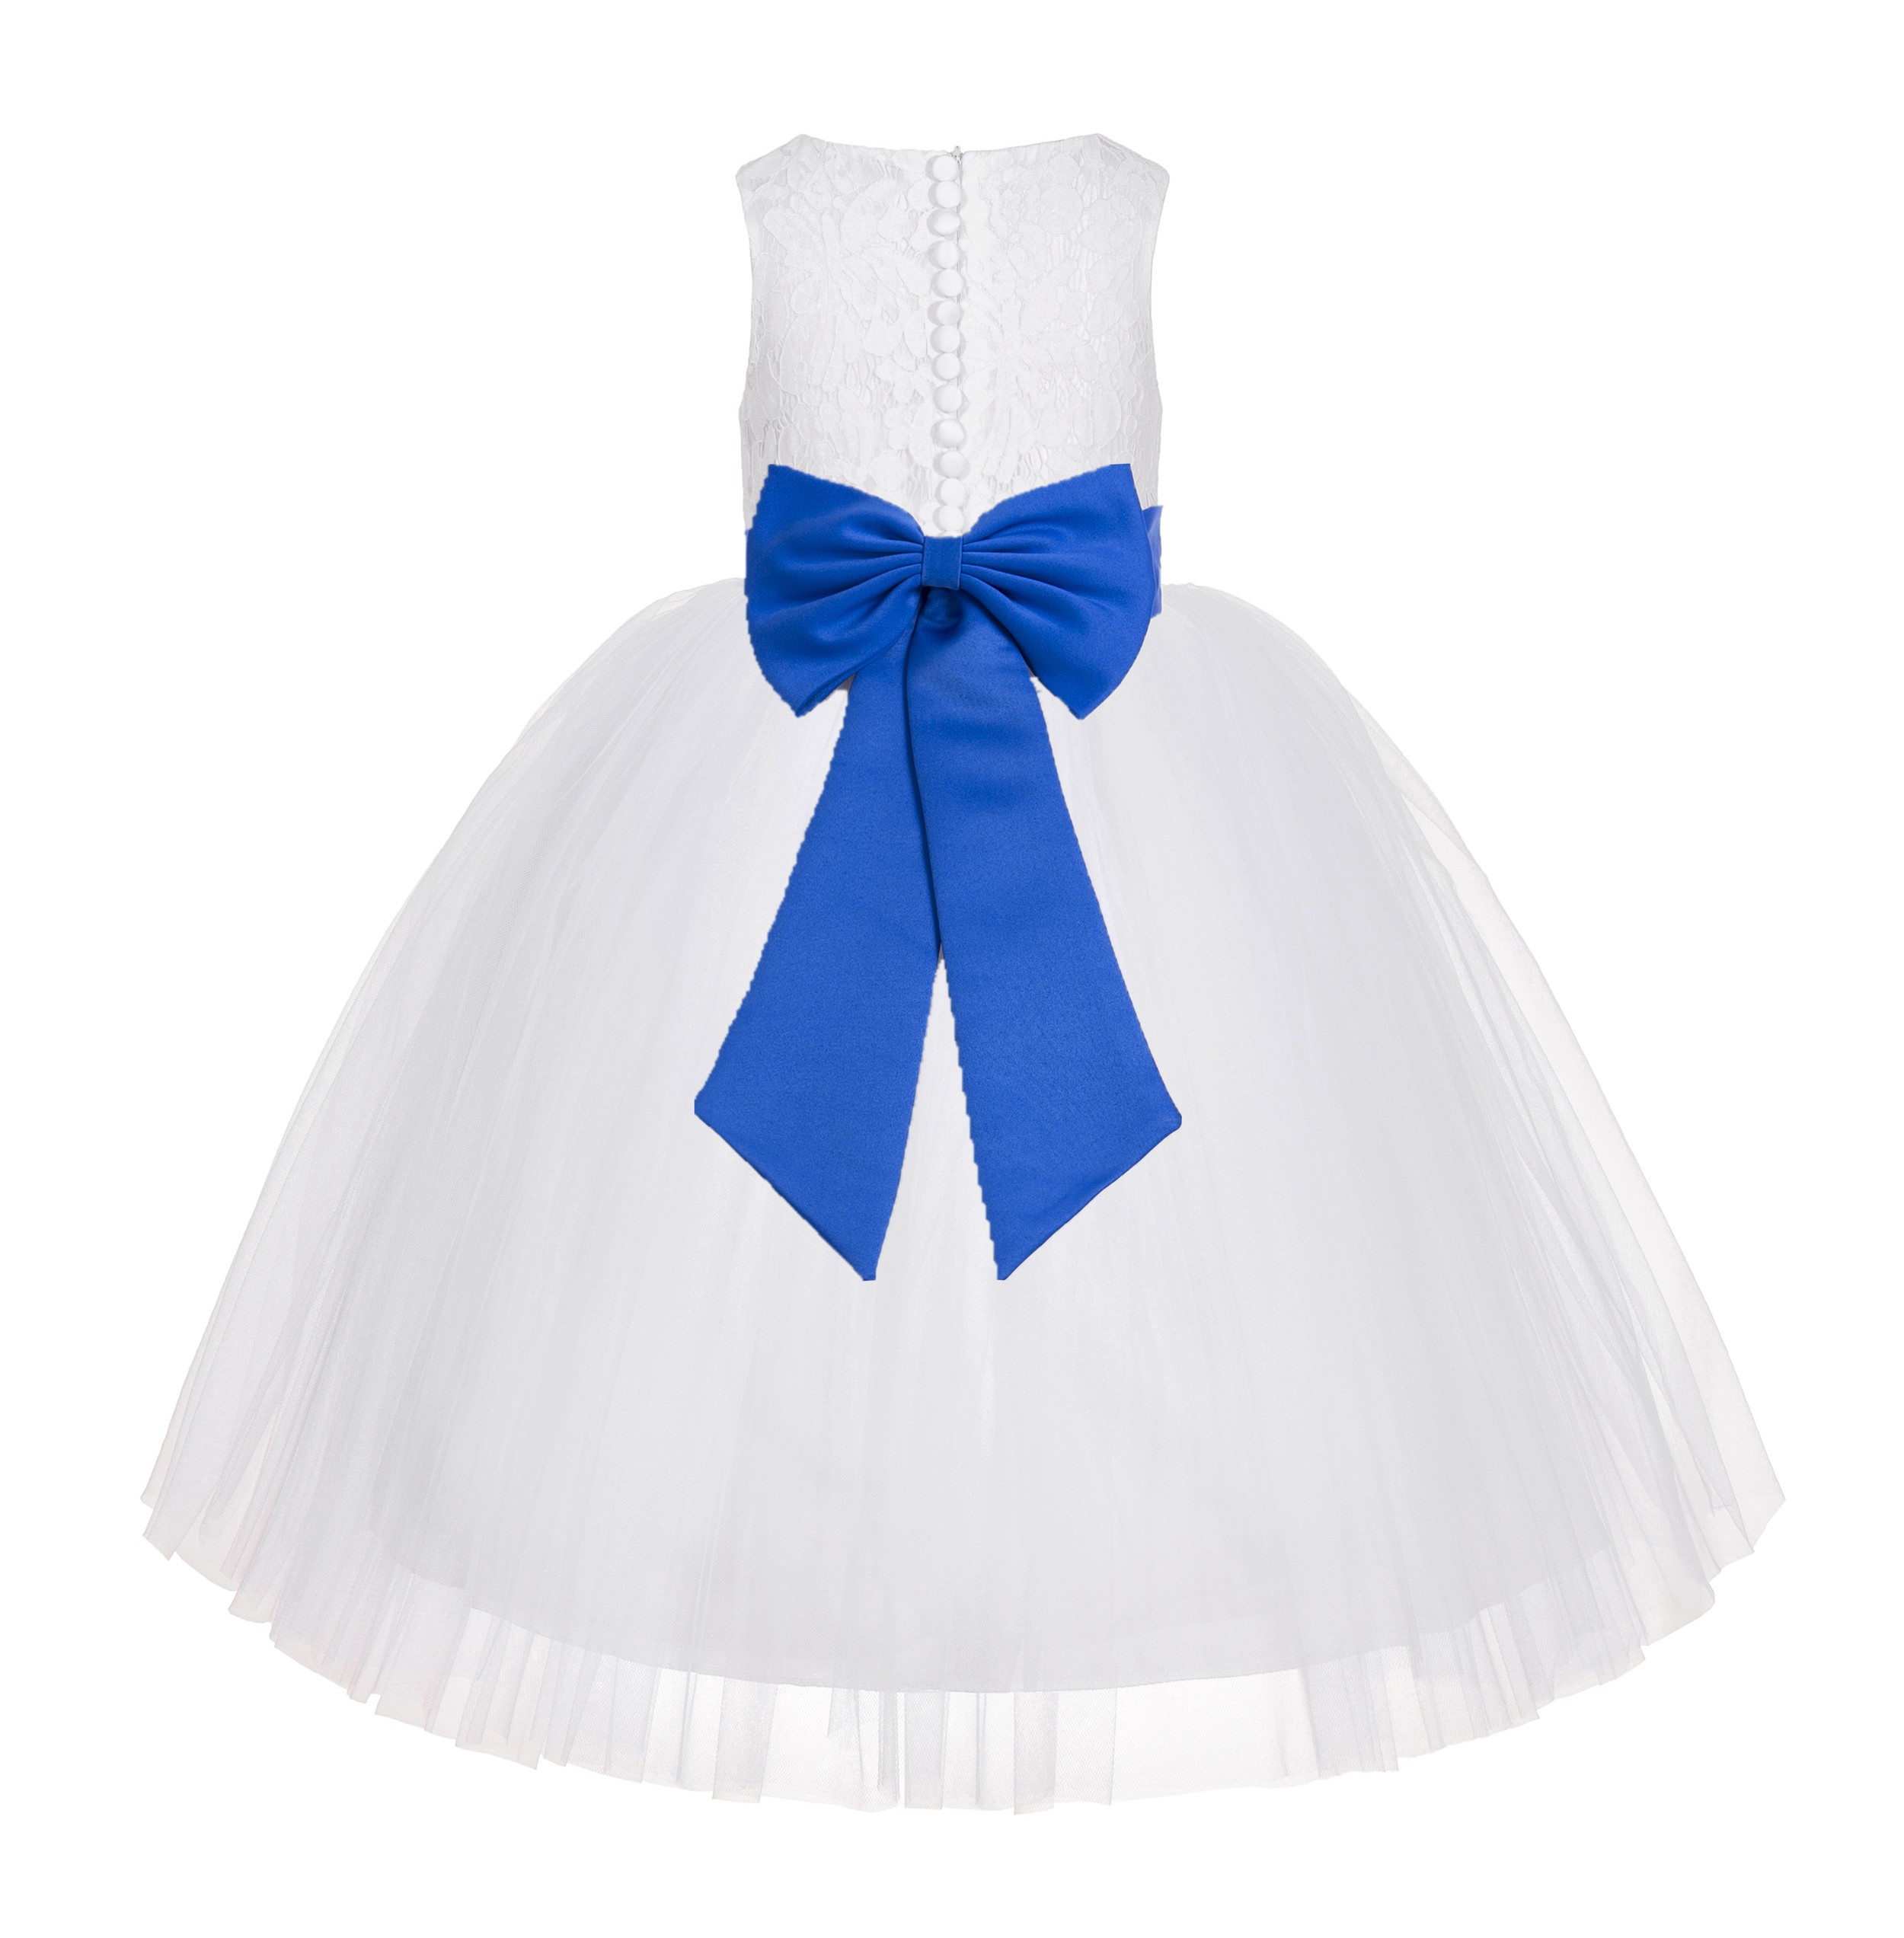 White / Royal Blue Floral Lace Flower Girl Dress White Ball Gown Lg7